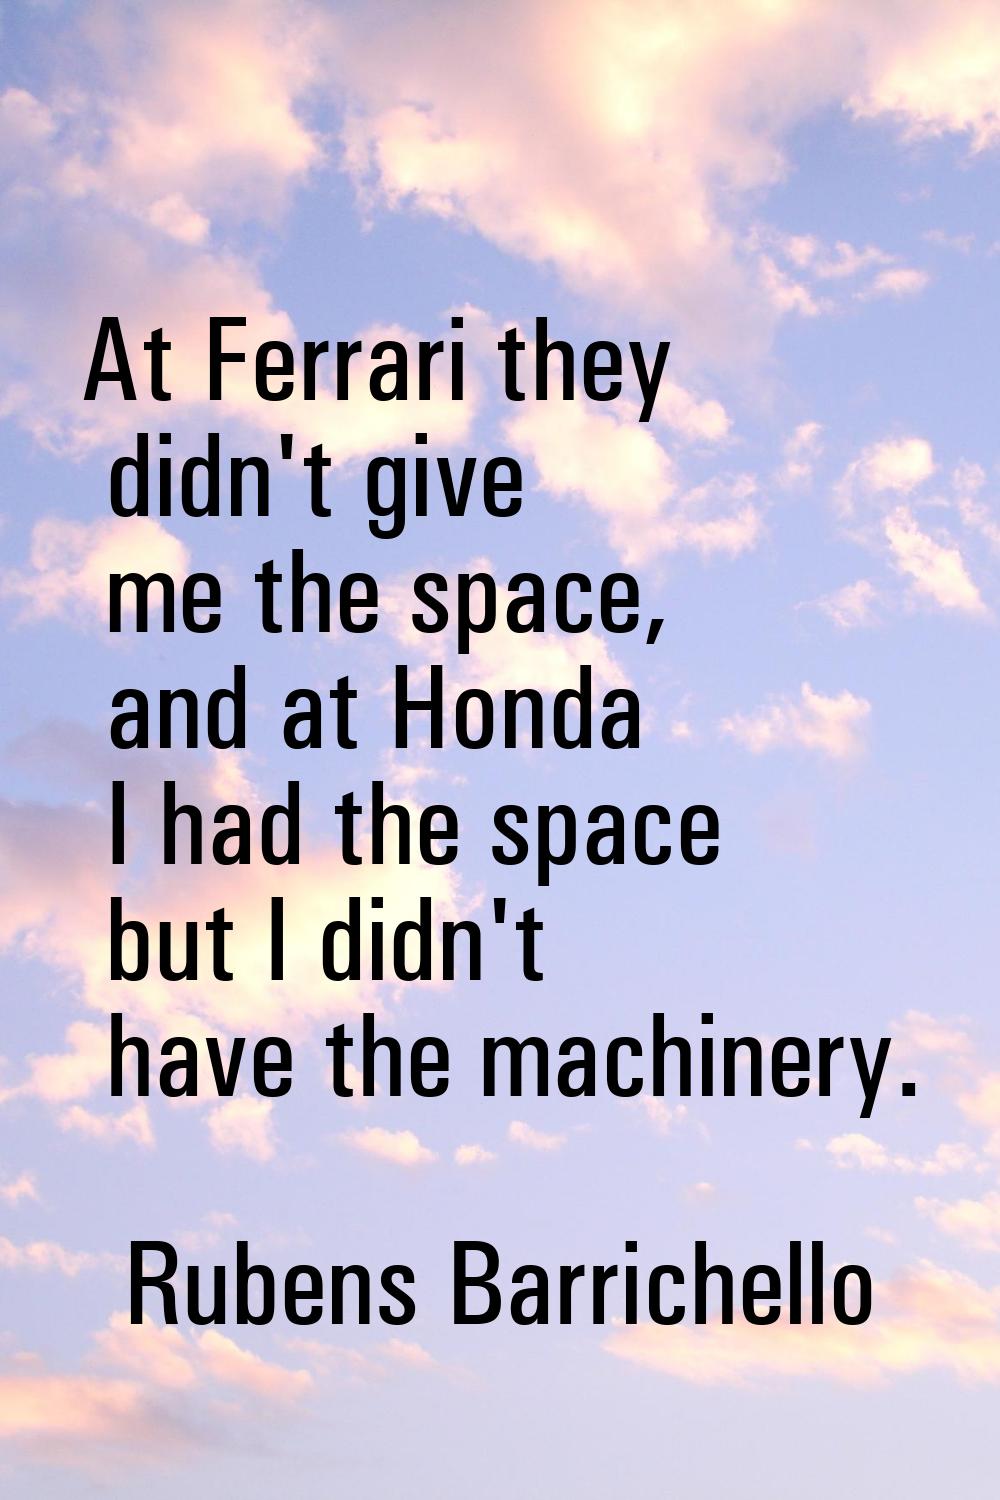 At Ferrari they didn't give me the space, and at Honda I had the space but I didn't have the machin